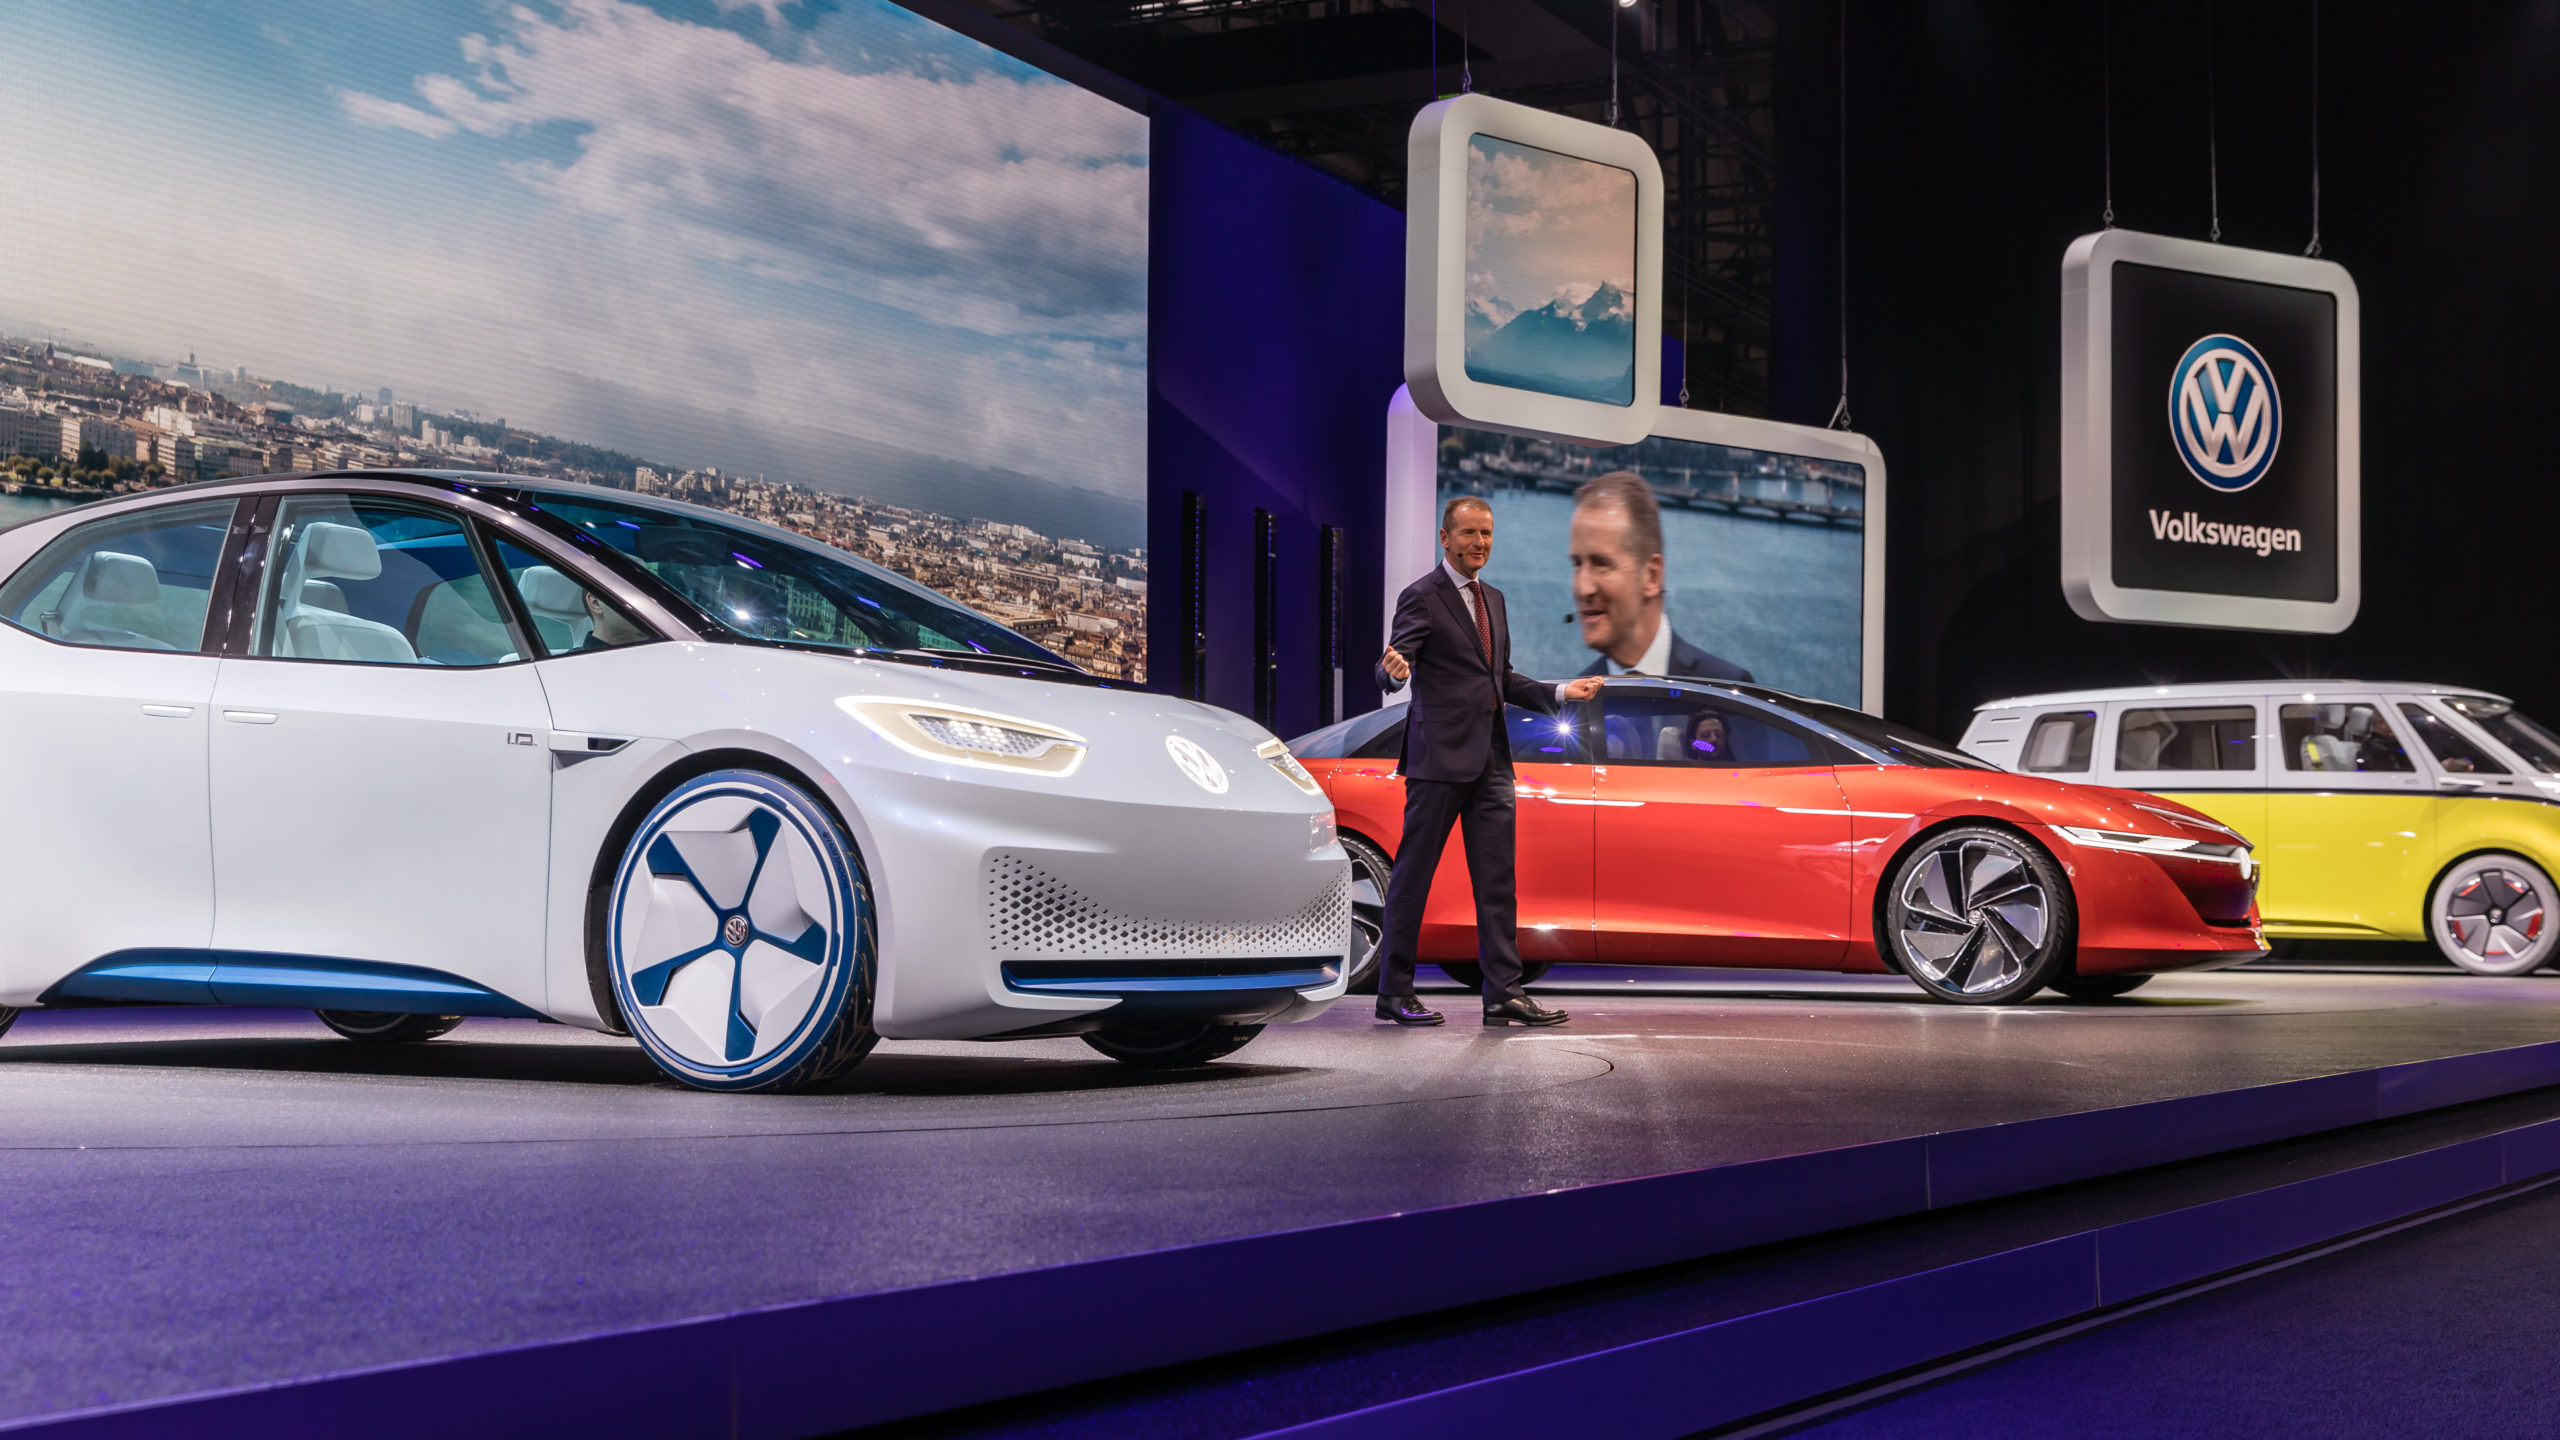 EV makers need to reimagine car design, cast aside legacy ideas and materials